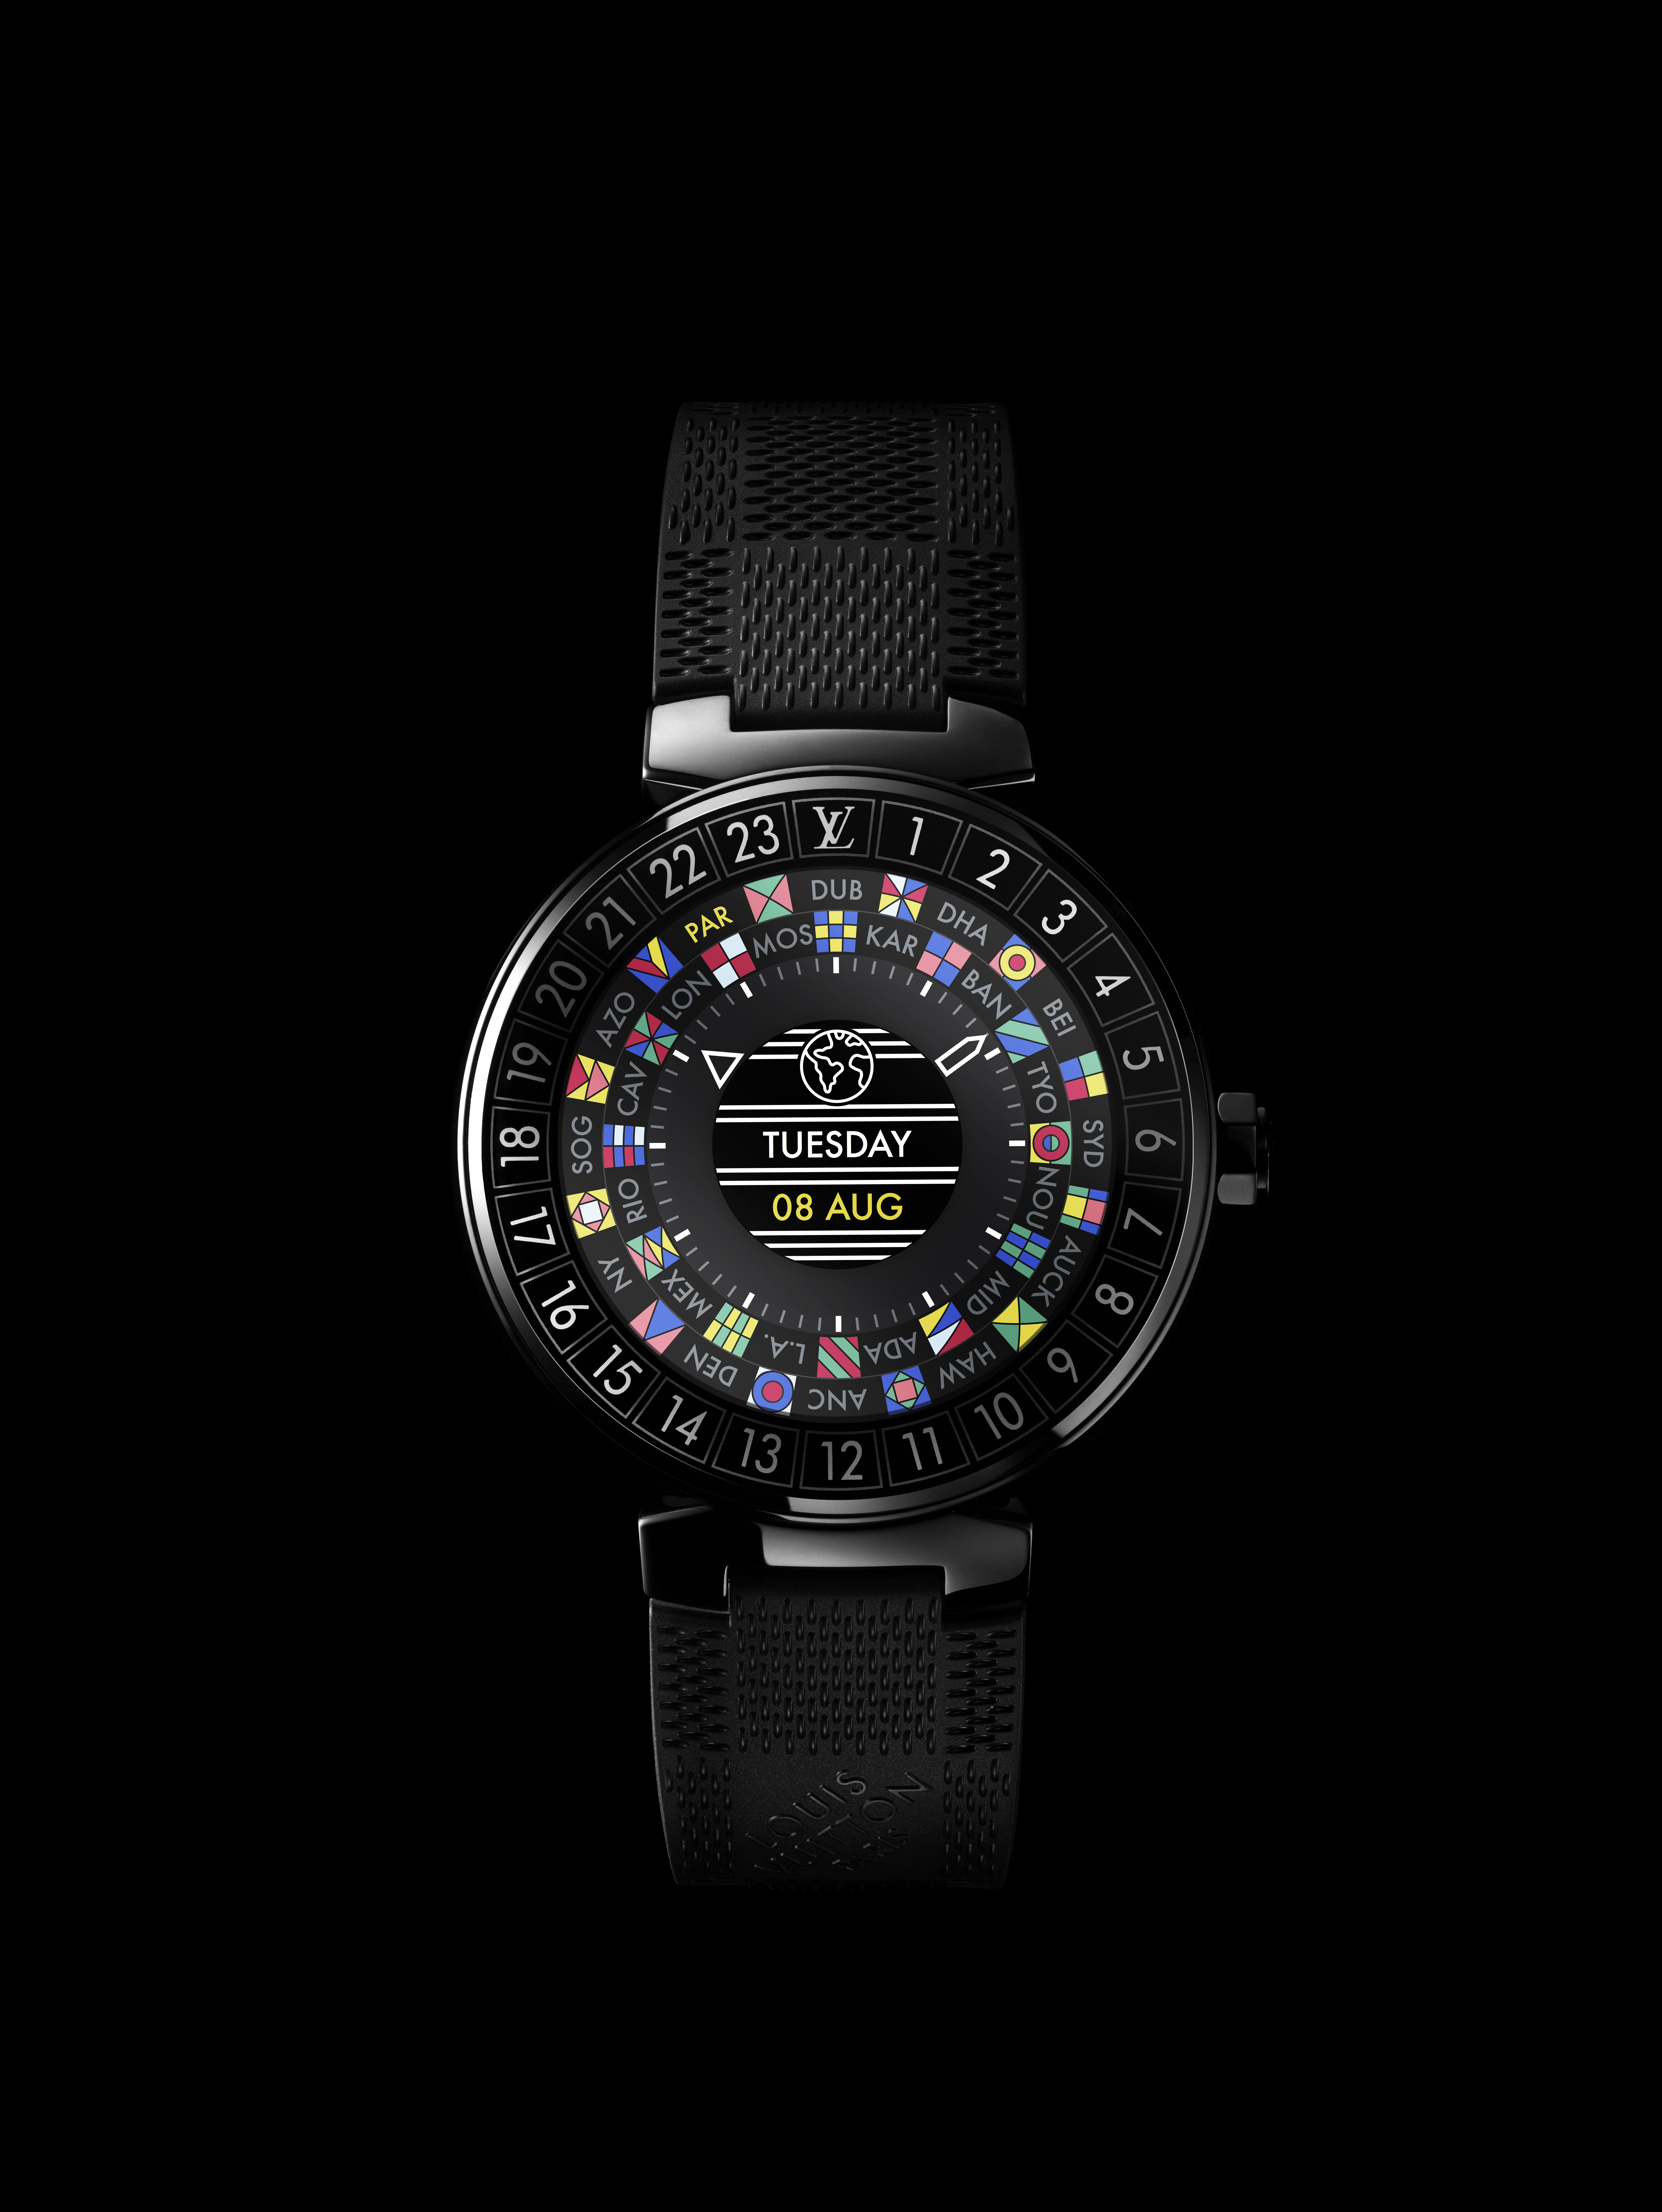 Time for a Change! Louis Vuitton Introduces the New Tambour Watch